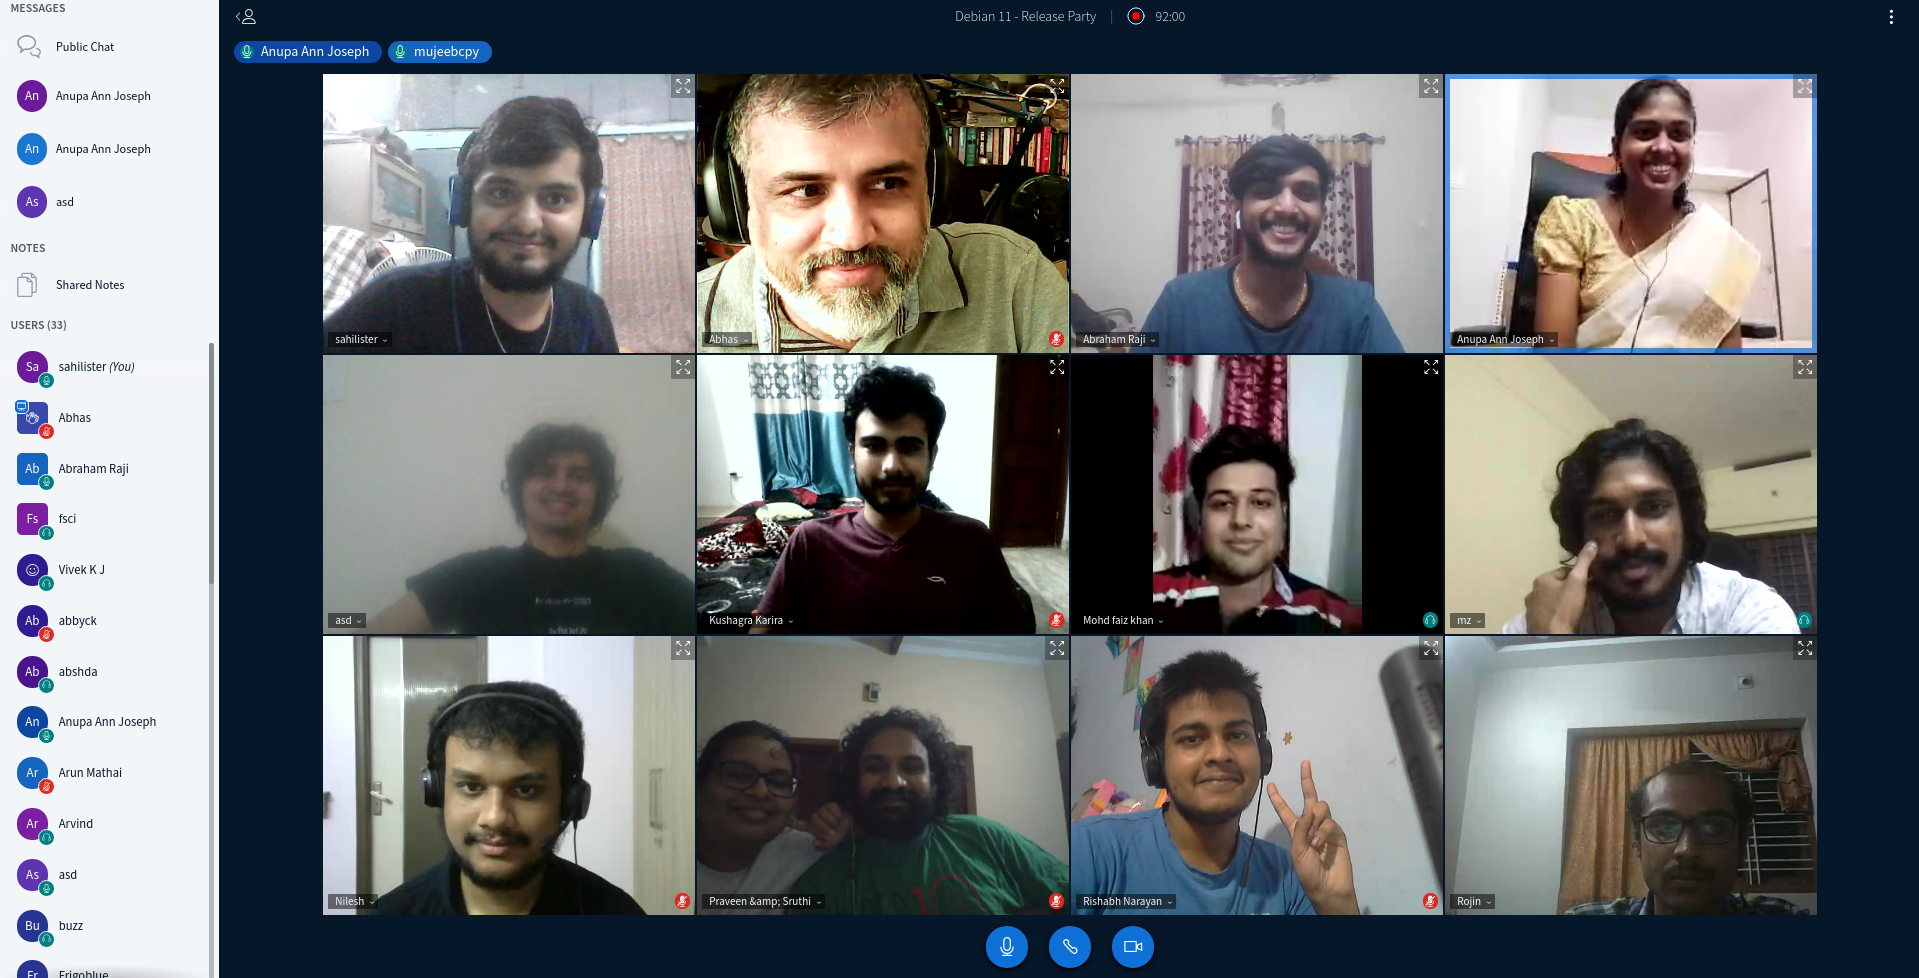 A screenshot of BigBlueButton room with folks who participated in the virtual Debian release party, India